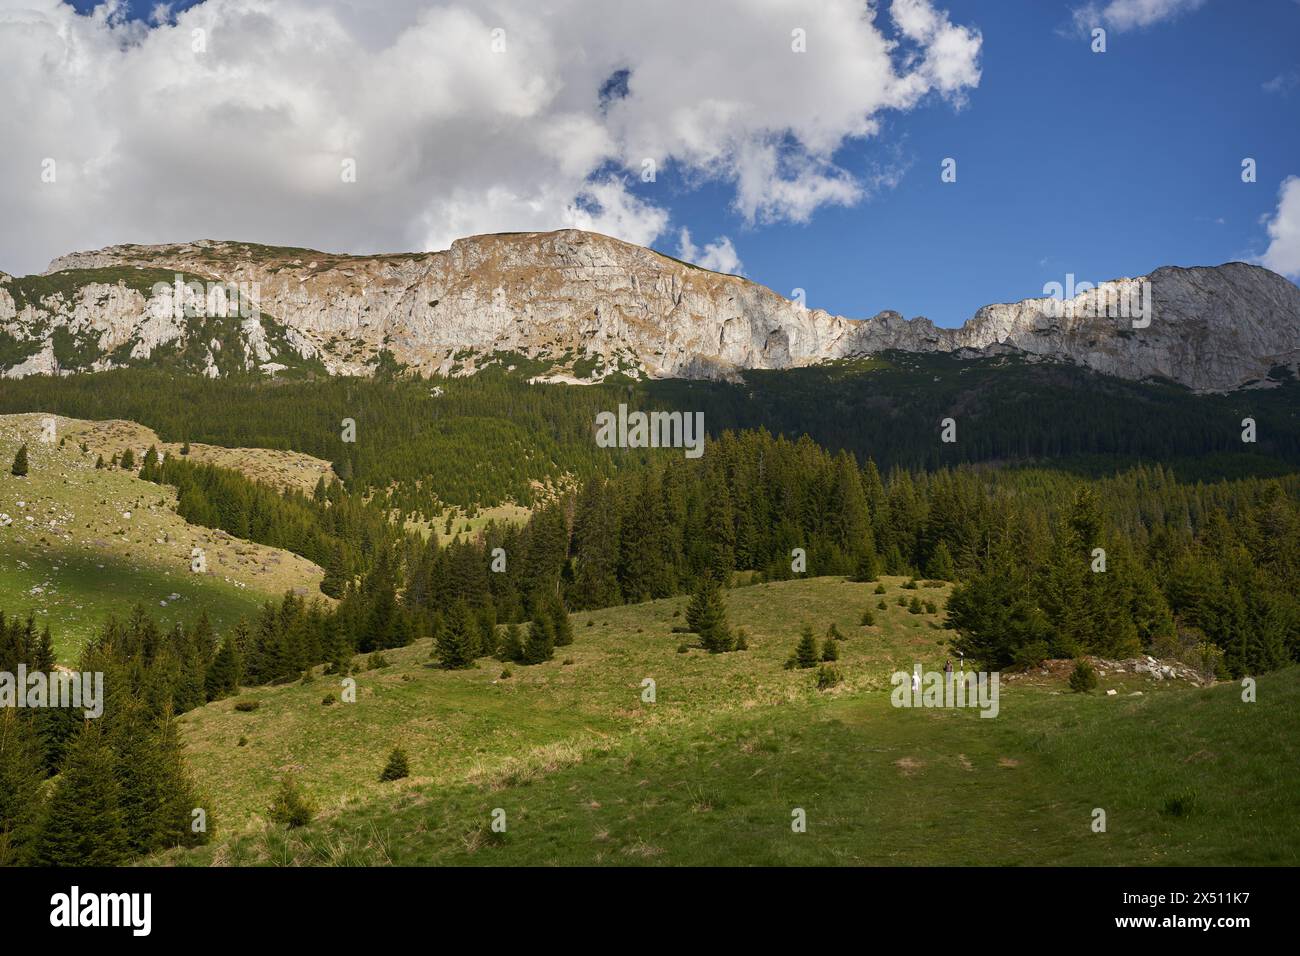 Rocky mountain peaks above hills covered in pine forests Stock Photo